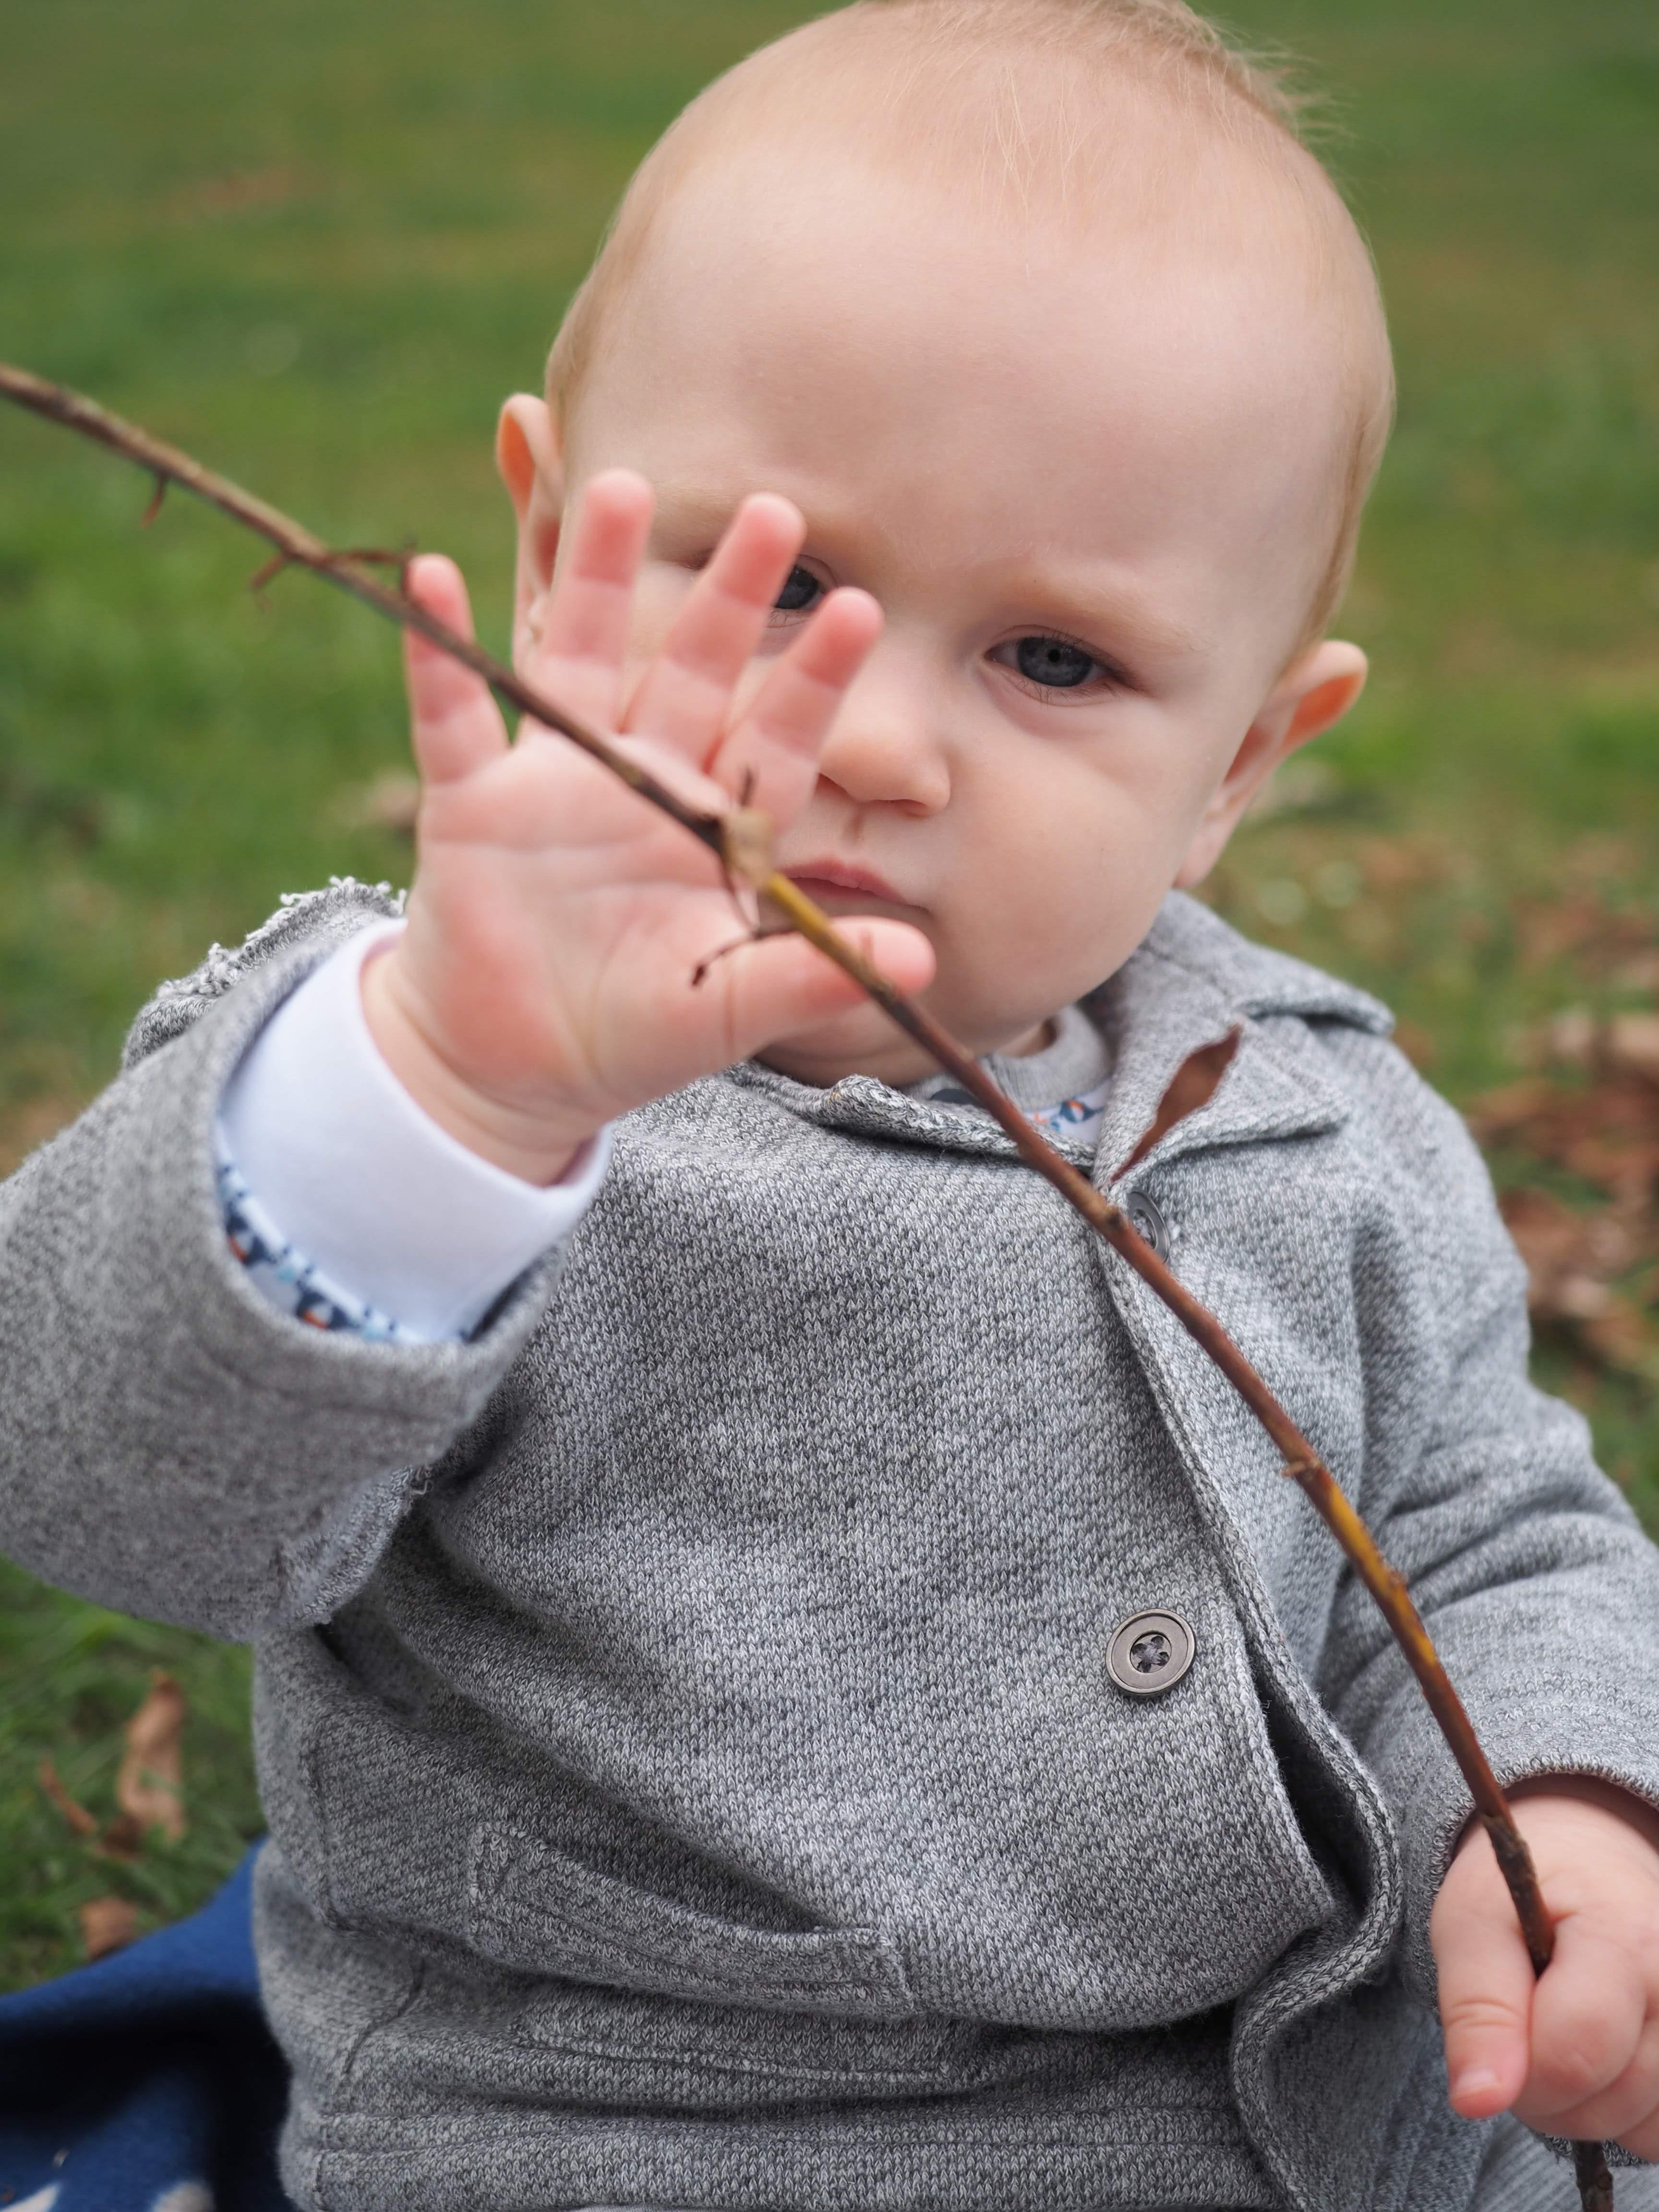 Nature Education At Happy Kids Budapest: Why Do We Let Children Play With Sticks